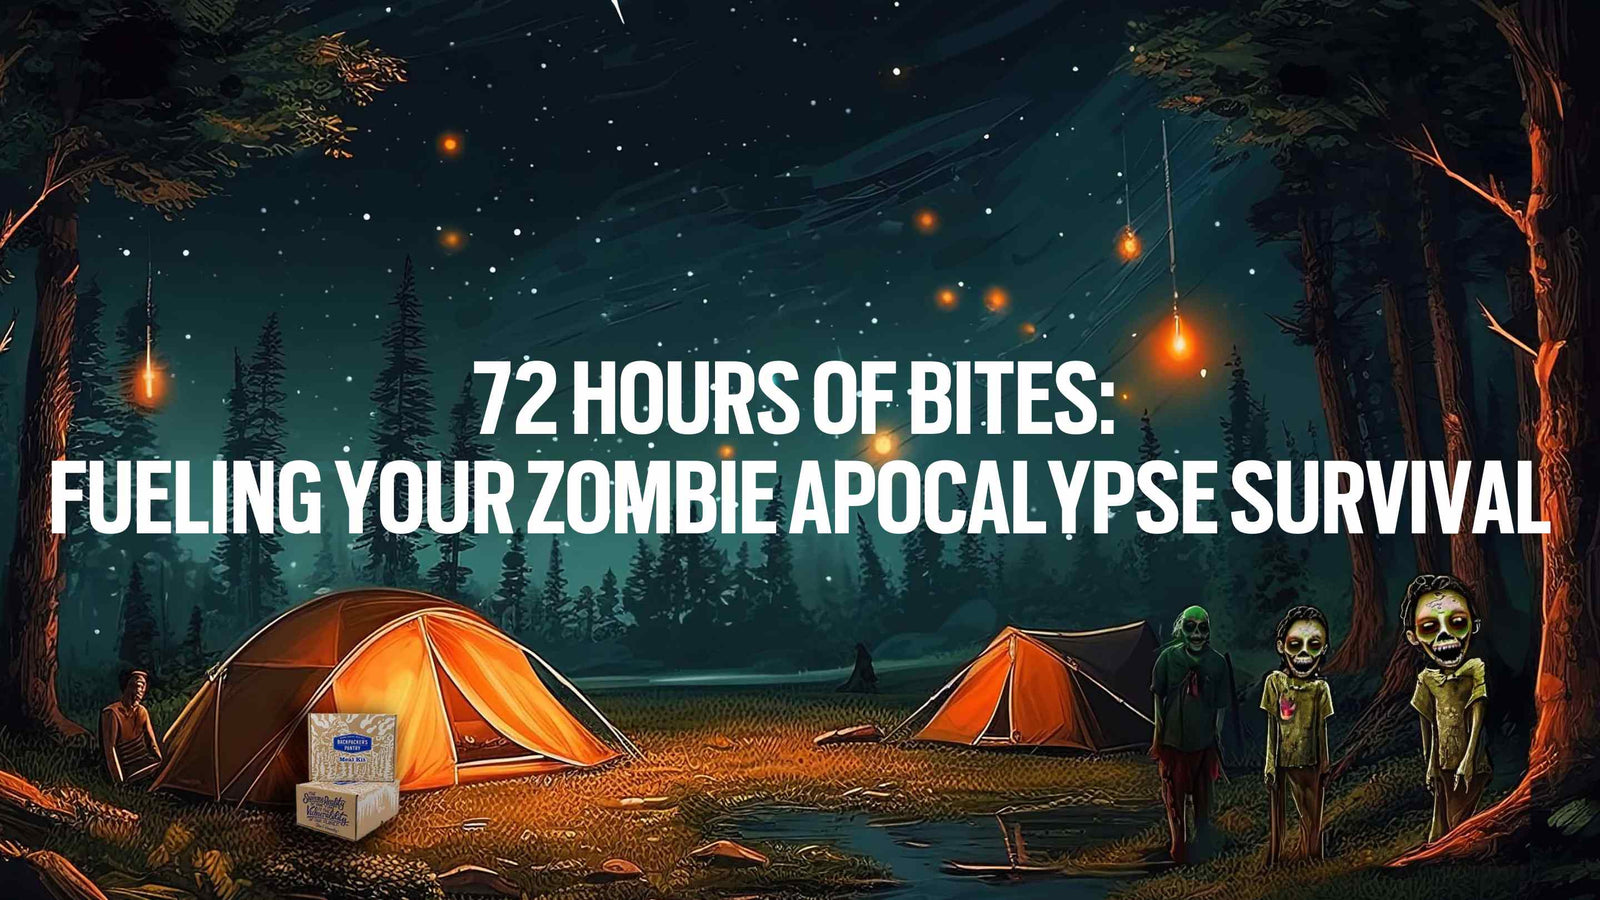 72 hour meals plan for zombie apocalypse 